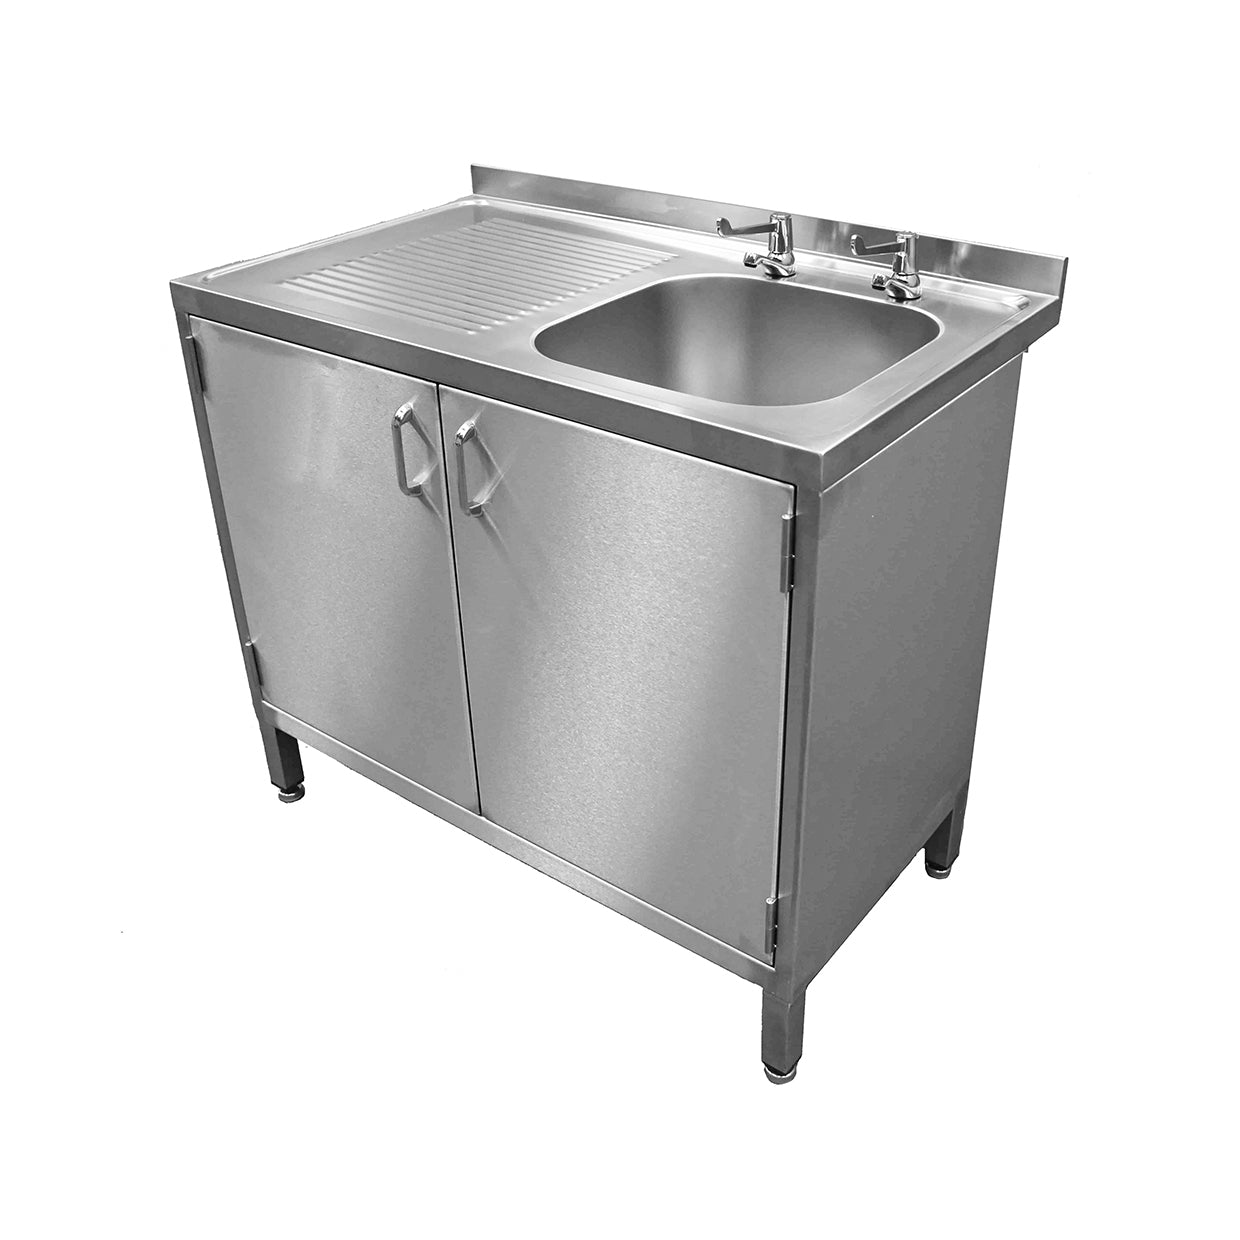 Stainless steel single bowl sink with cupboard